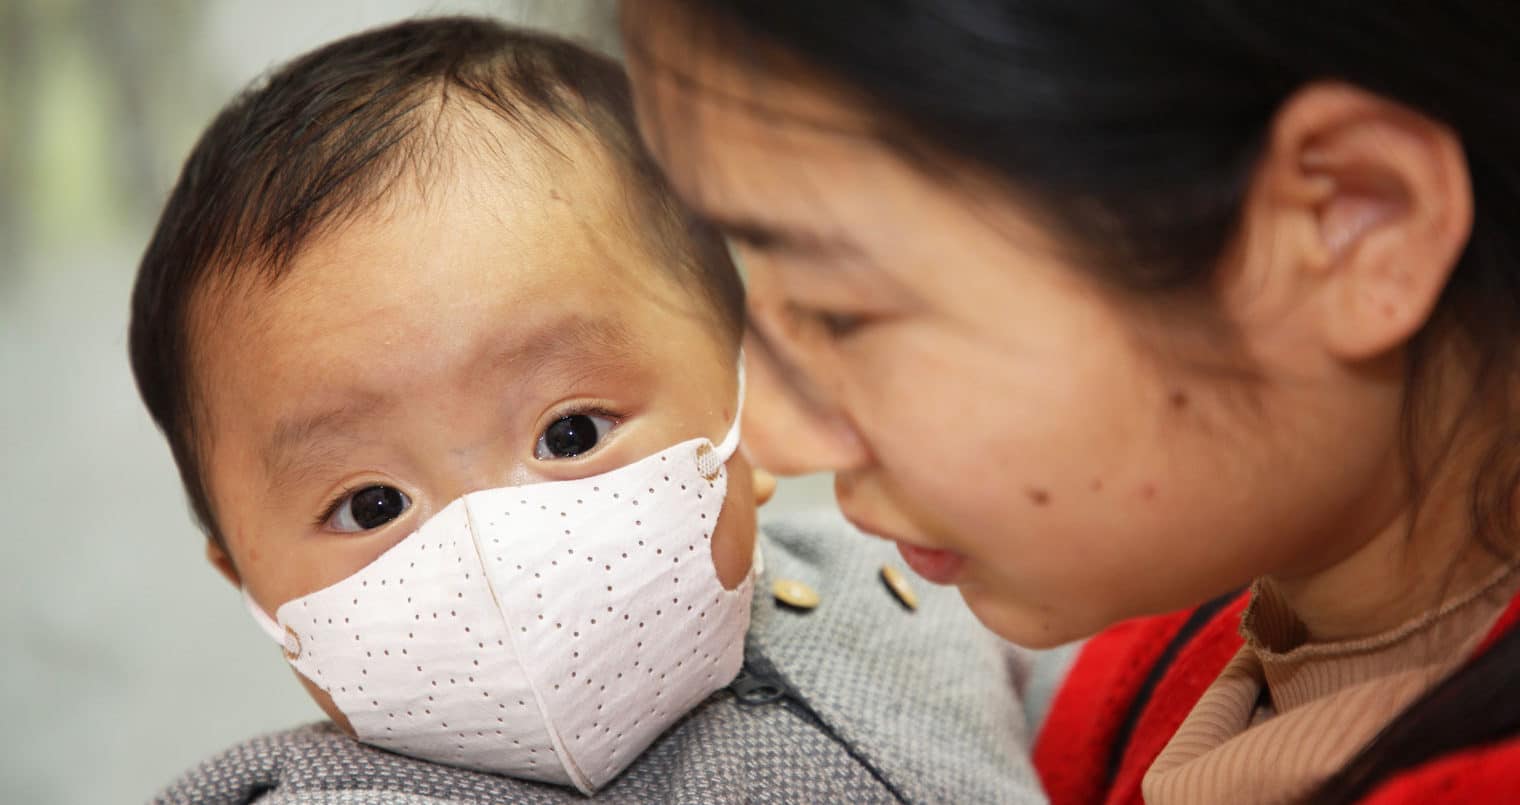 Woman holding her child who is wearing a face mask to help prevent catching the coronavirus.